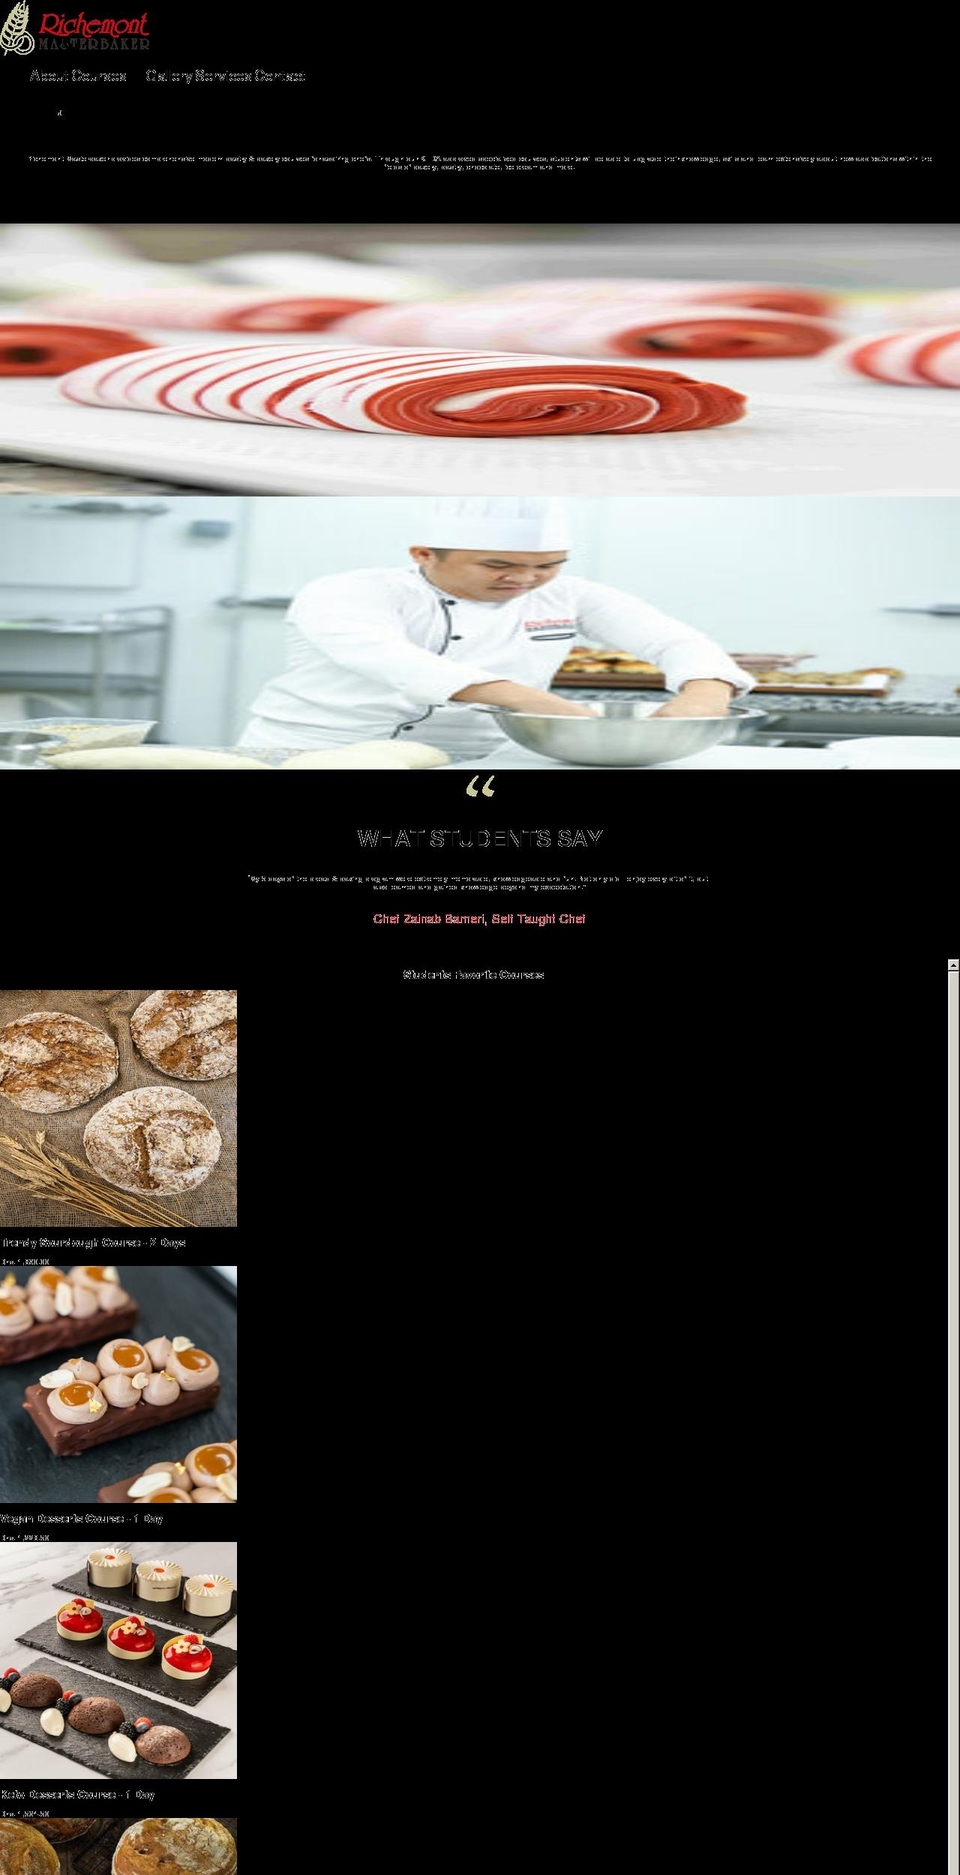 Context Shopify theme site example richemont-masterbaker.com